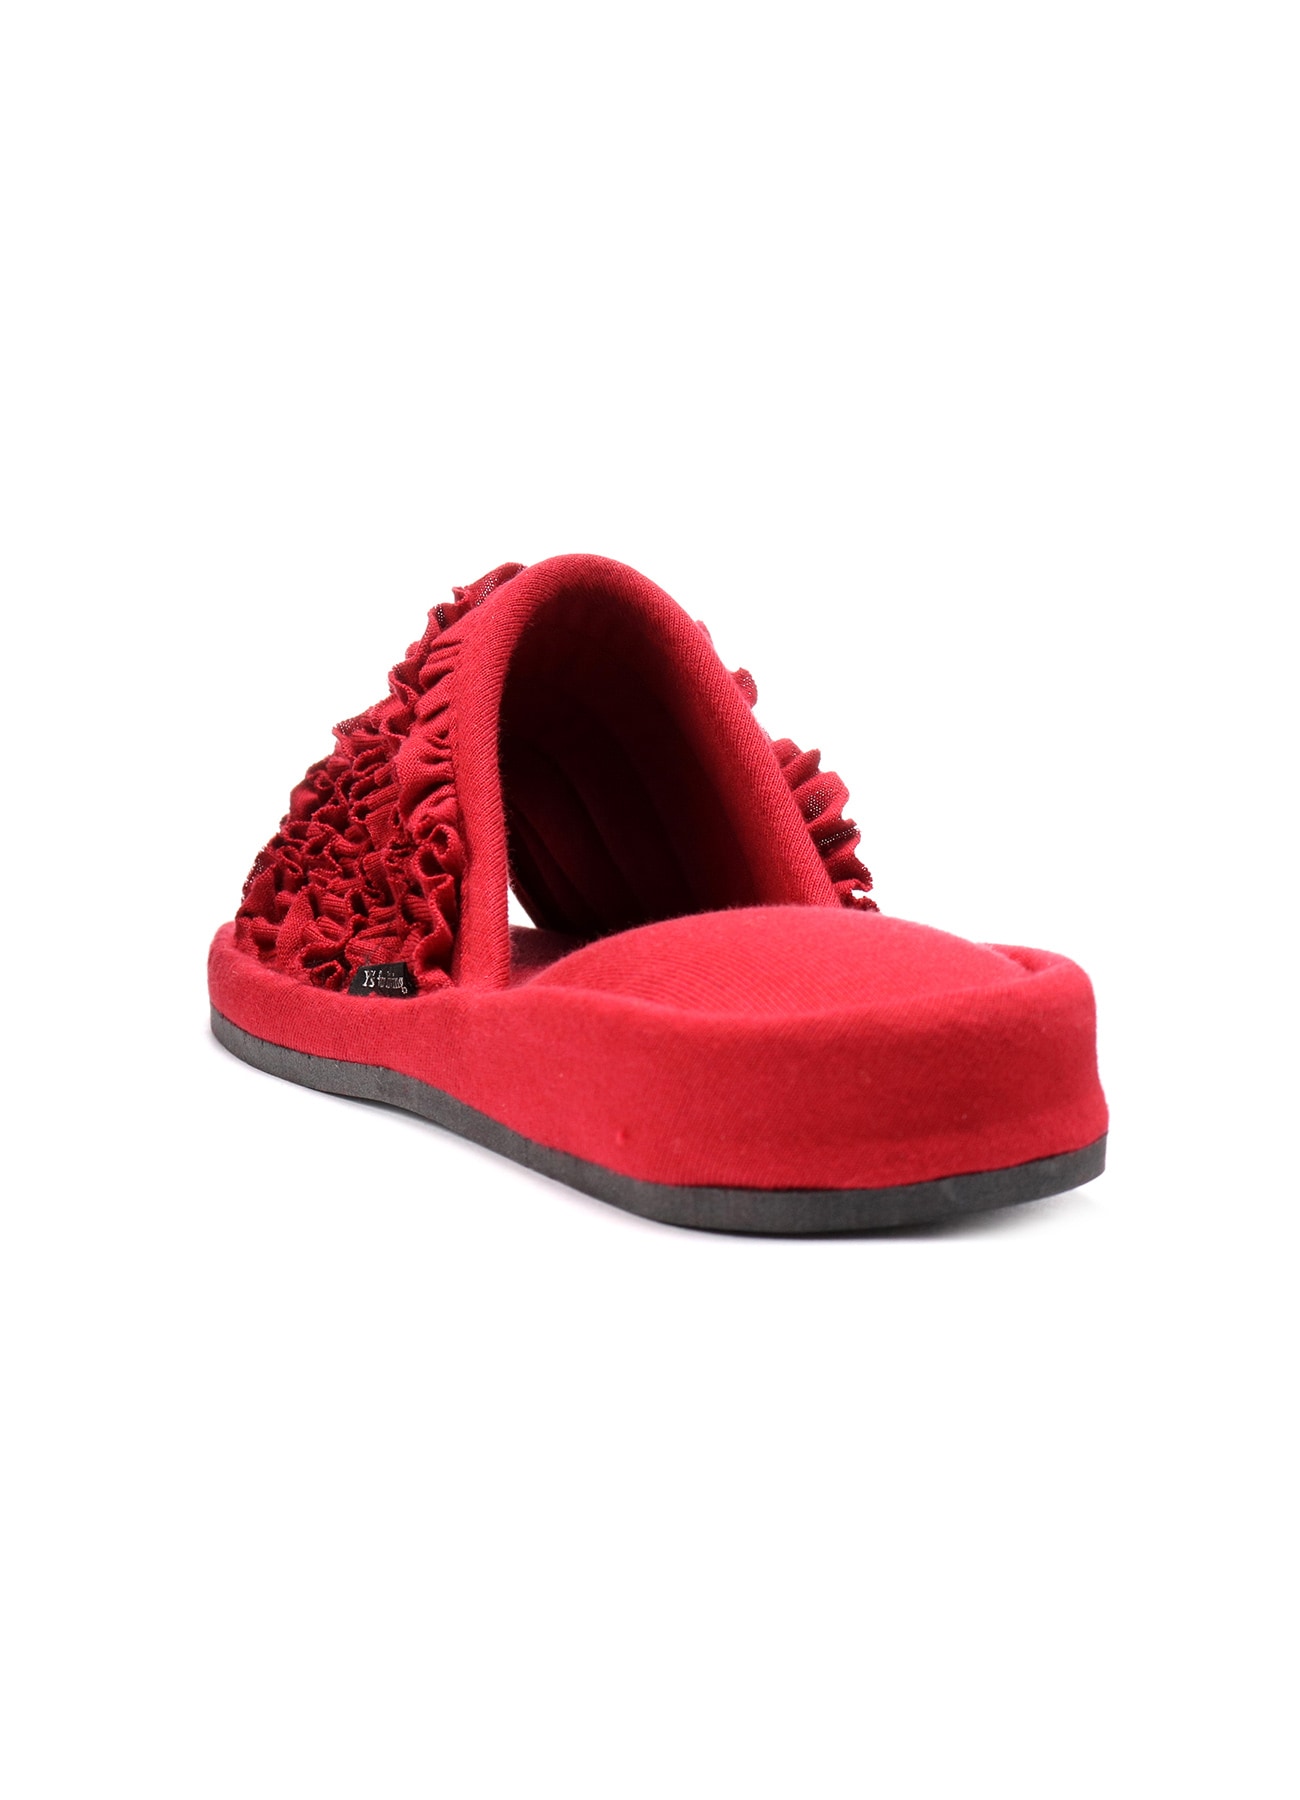 COTTON JERSEY SLIPPERS